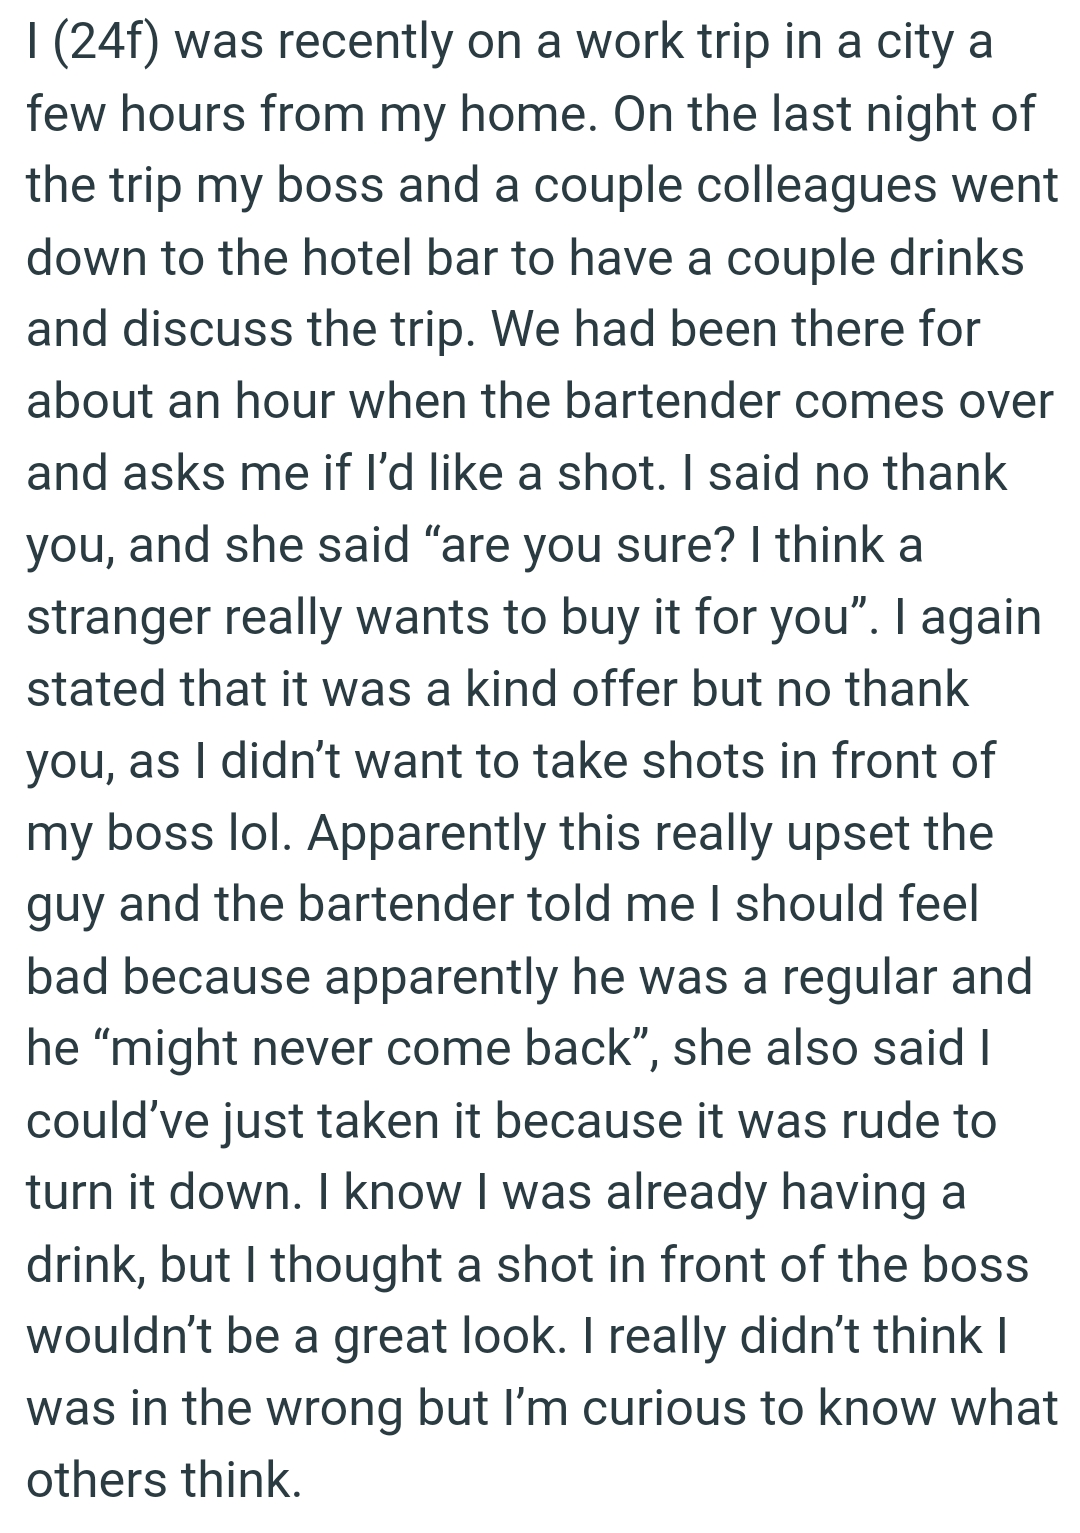 Bartender says OP could’ve just taken the shot because it was rude to turn it down